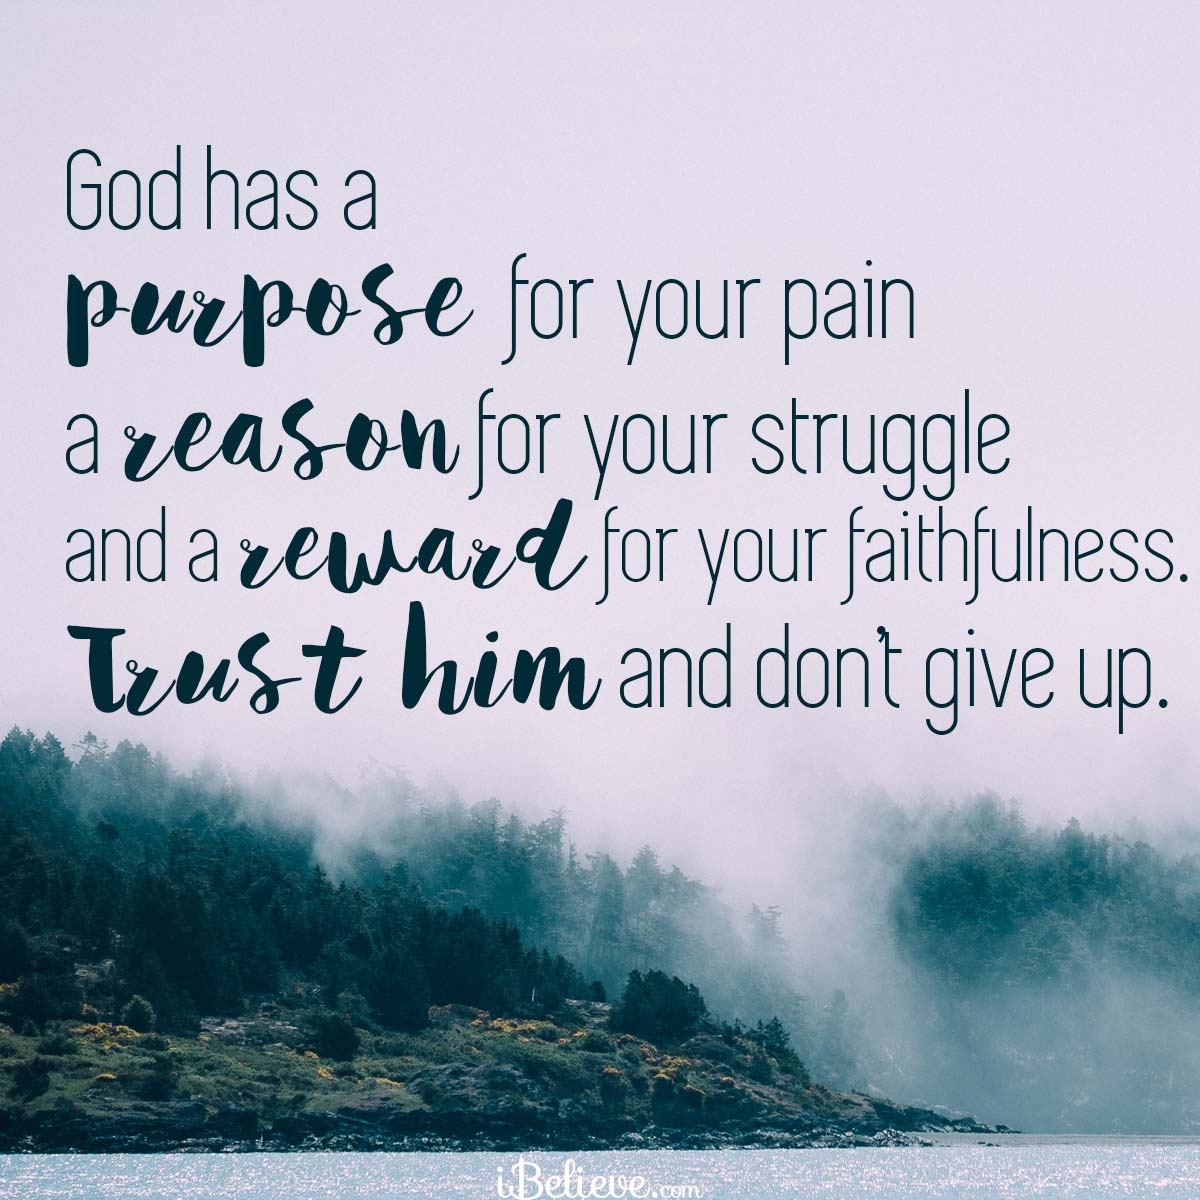 God Has a Purpose for Your Pain - Your Daily Verse